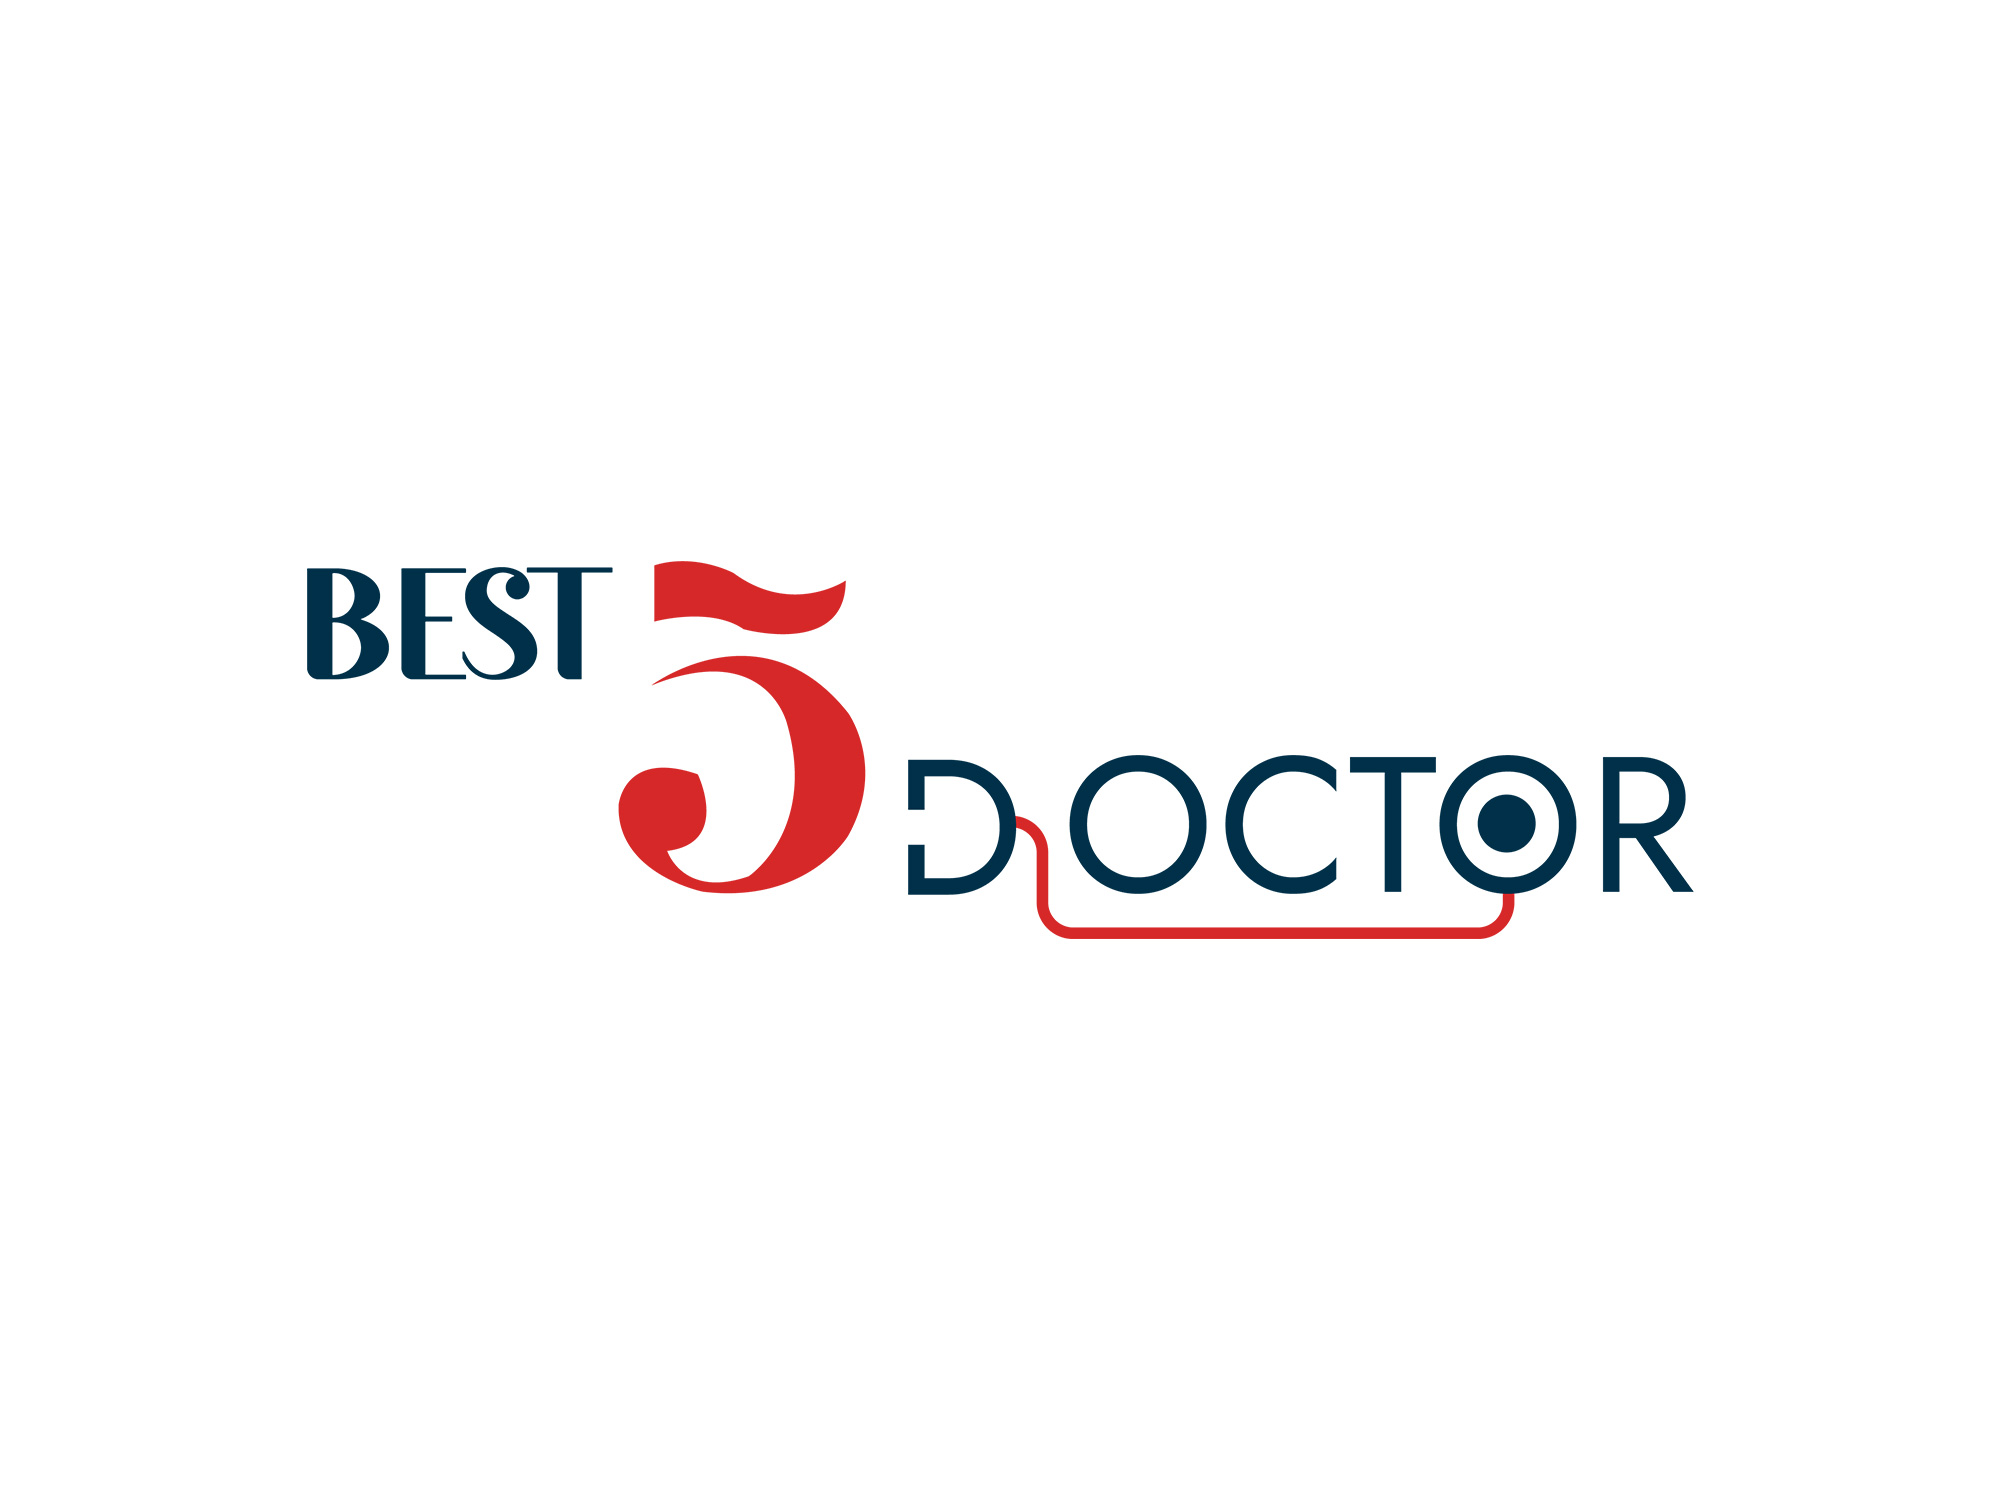 Best 5 Doctor 2D Logo Designing - XpertLab Technolgoies Private Limited